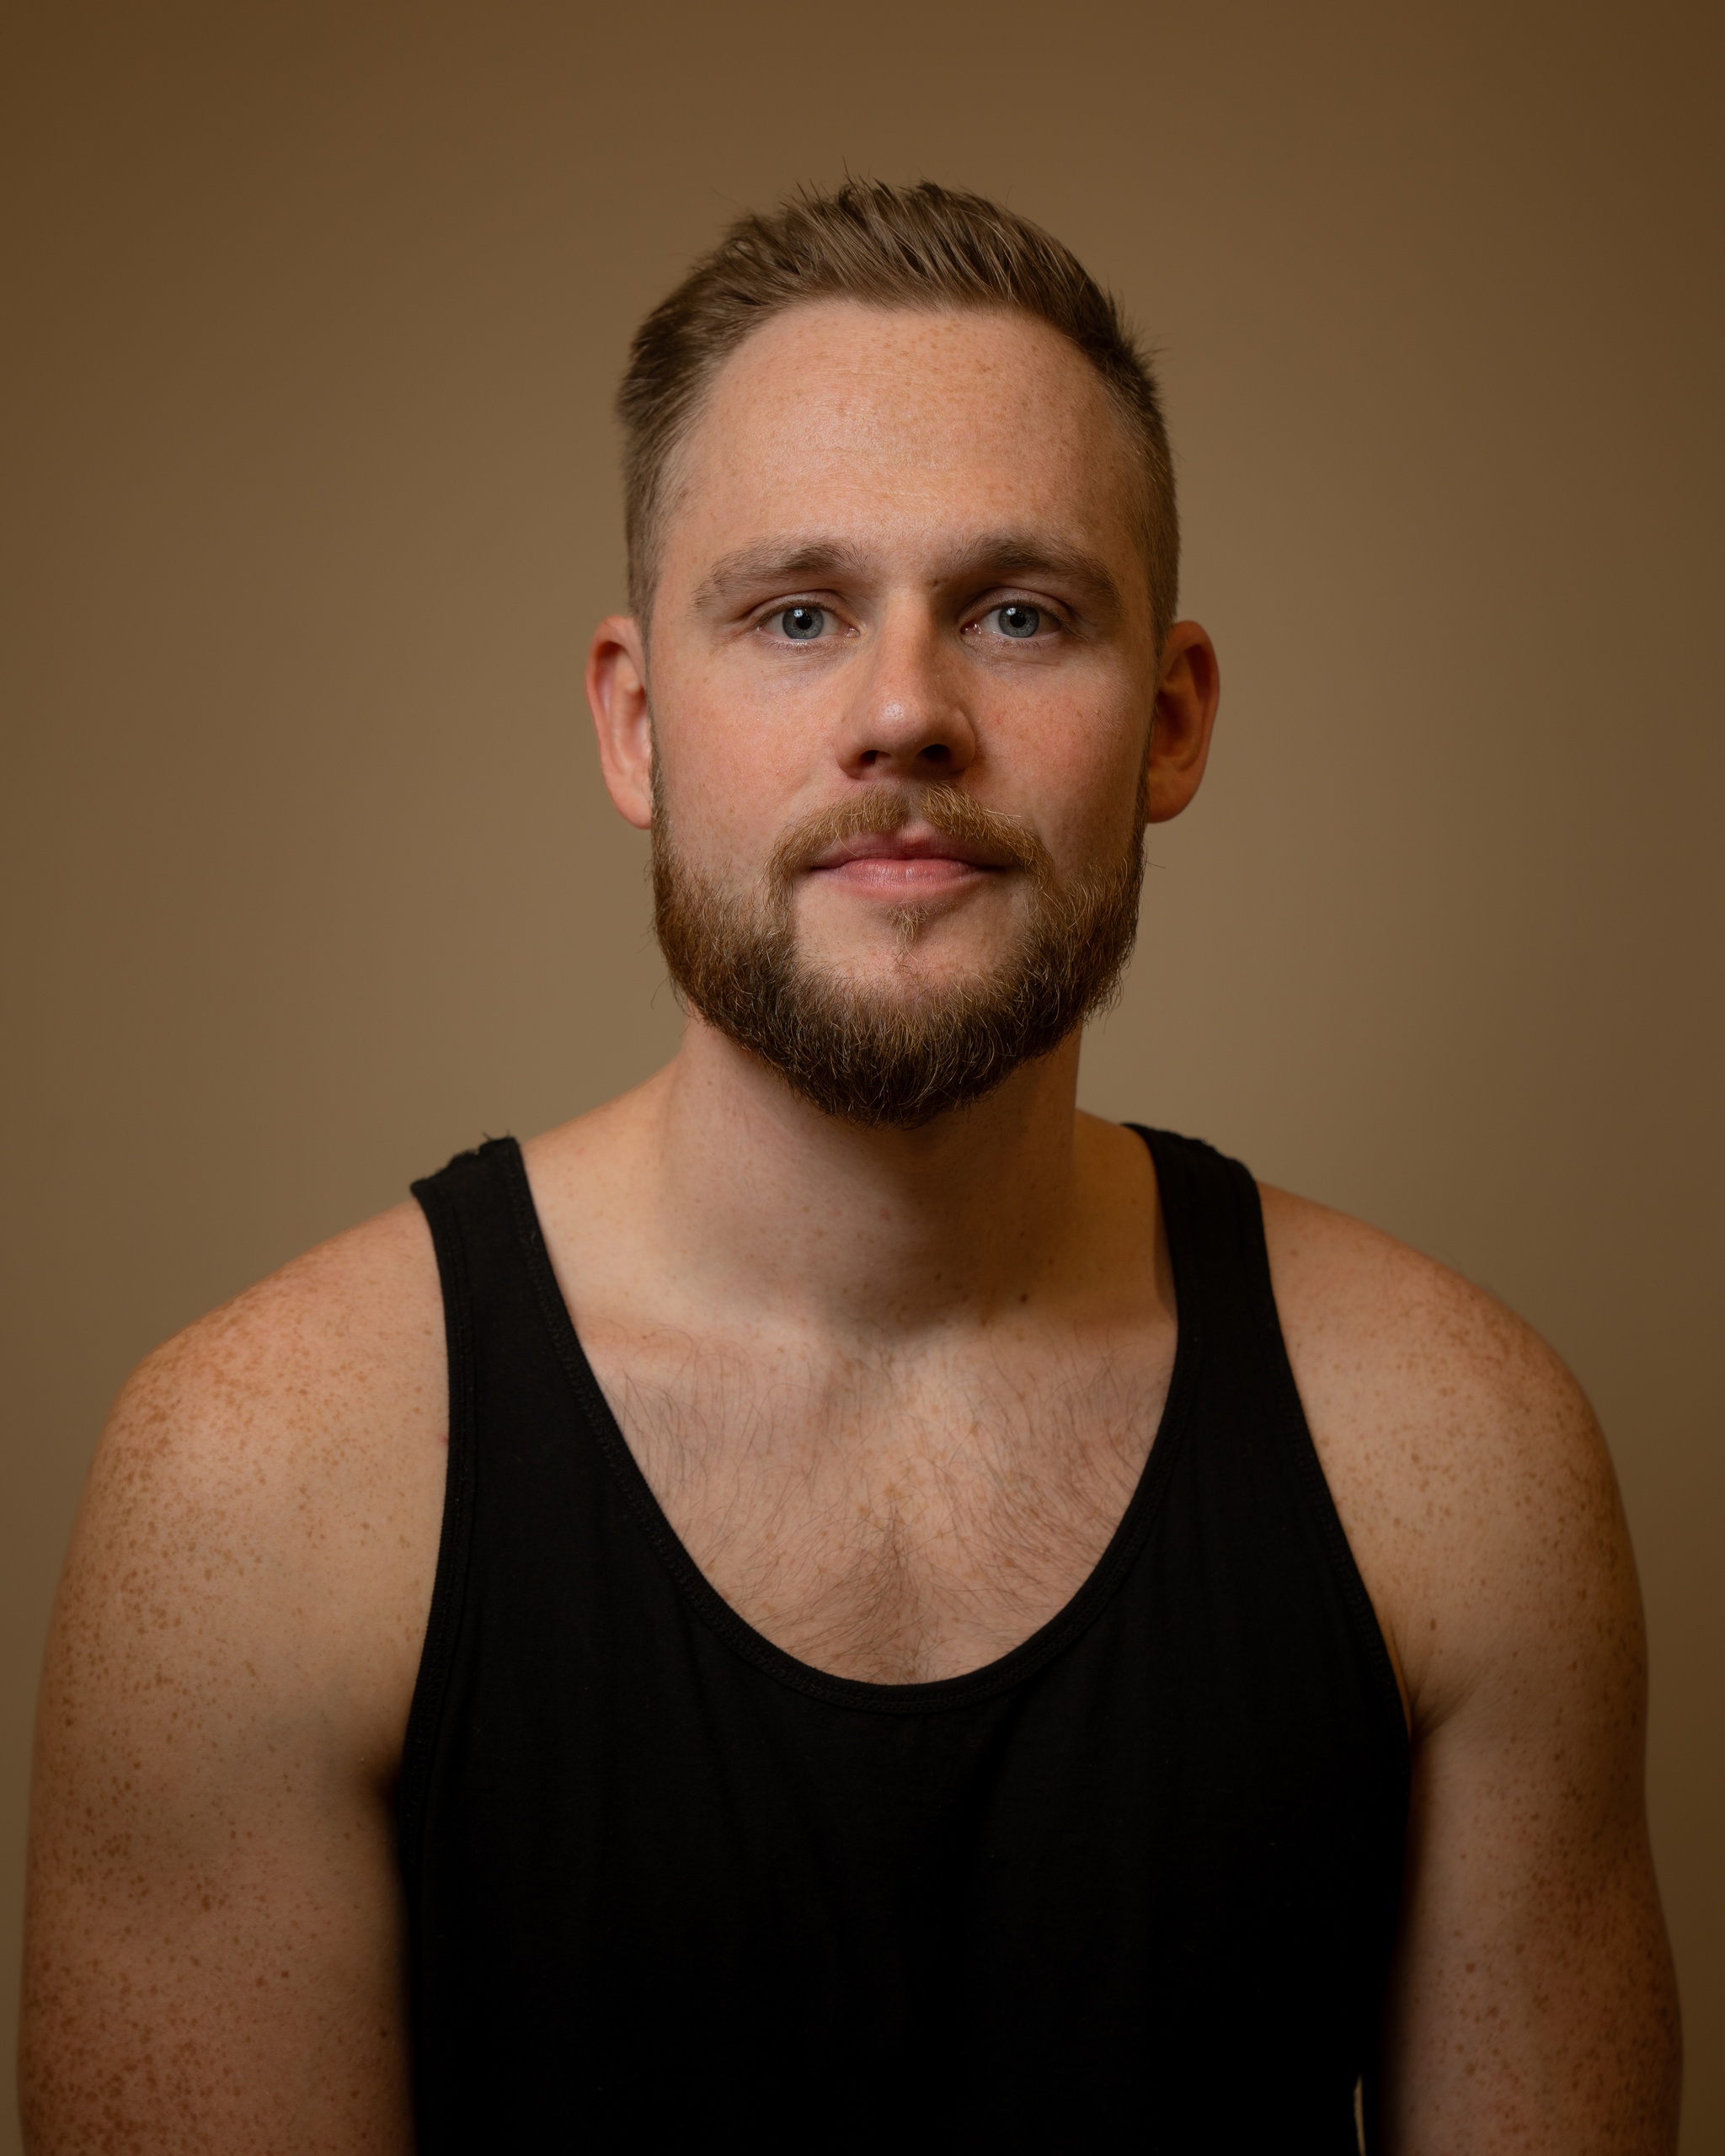 A portrait of Sebastian Charles. Sebastian has short light brown hair and a trimmed bears. He wears a tank top, looking directly at us, while posing against a neutral brown background.